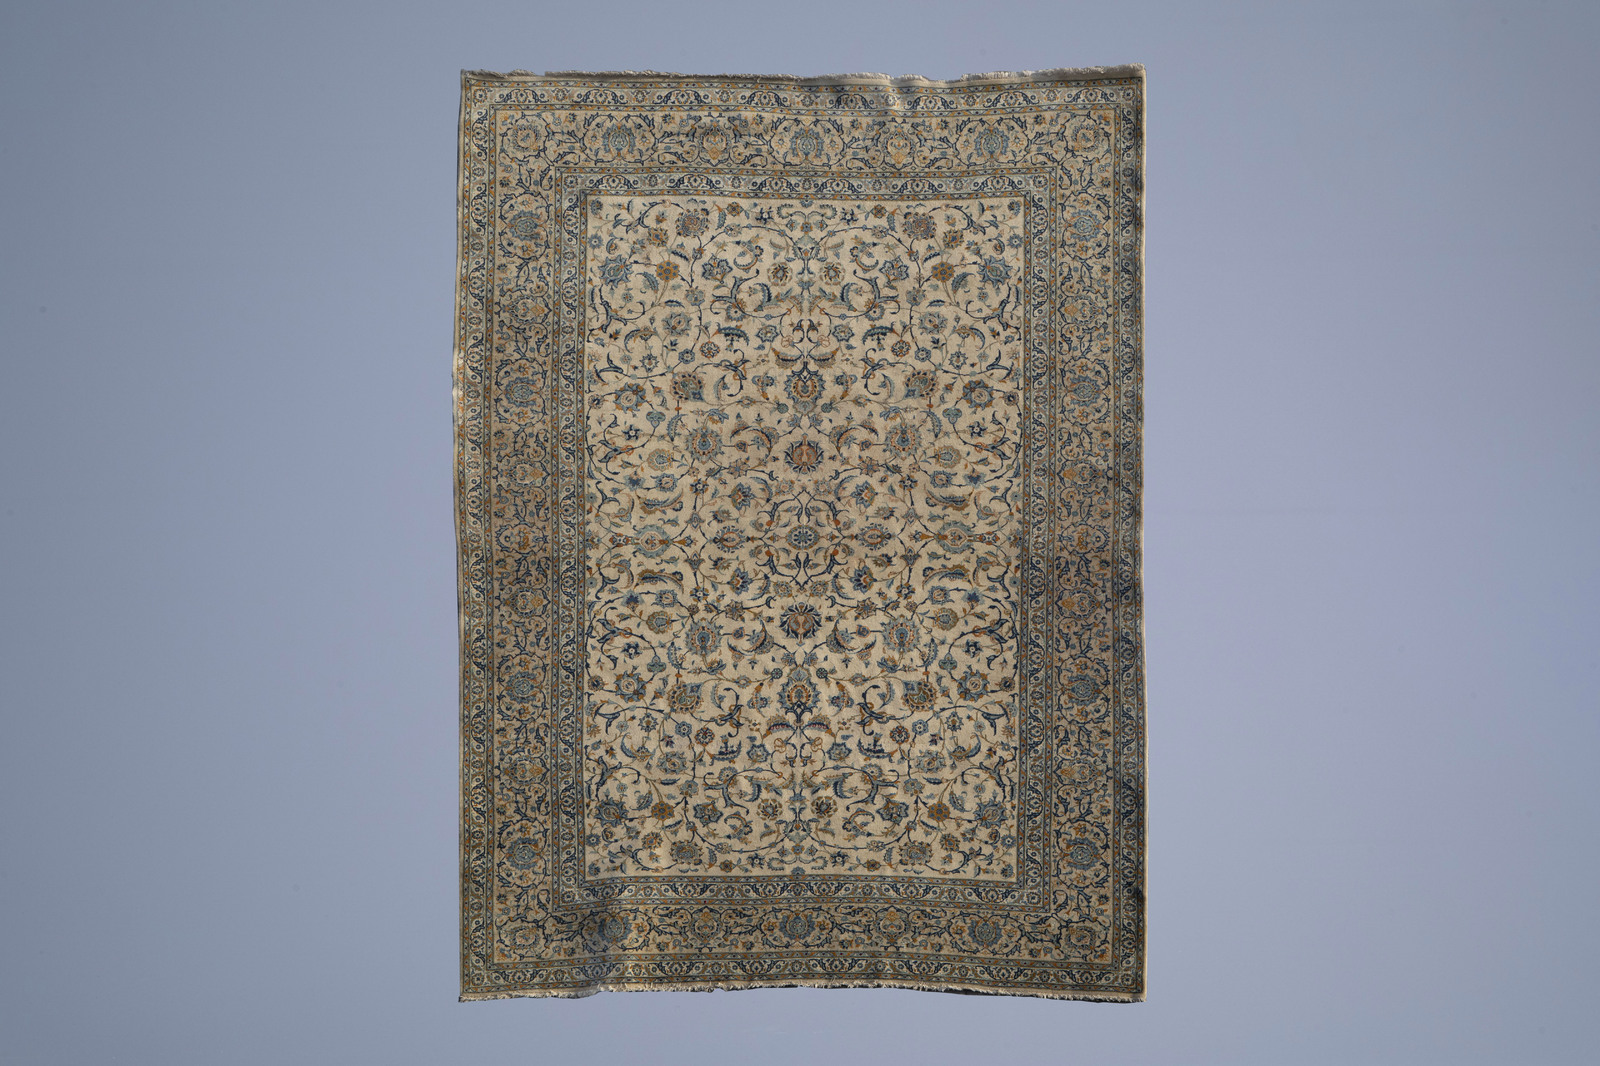 A large Oriental rug with floral design, wool on cotton, 20th C.